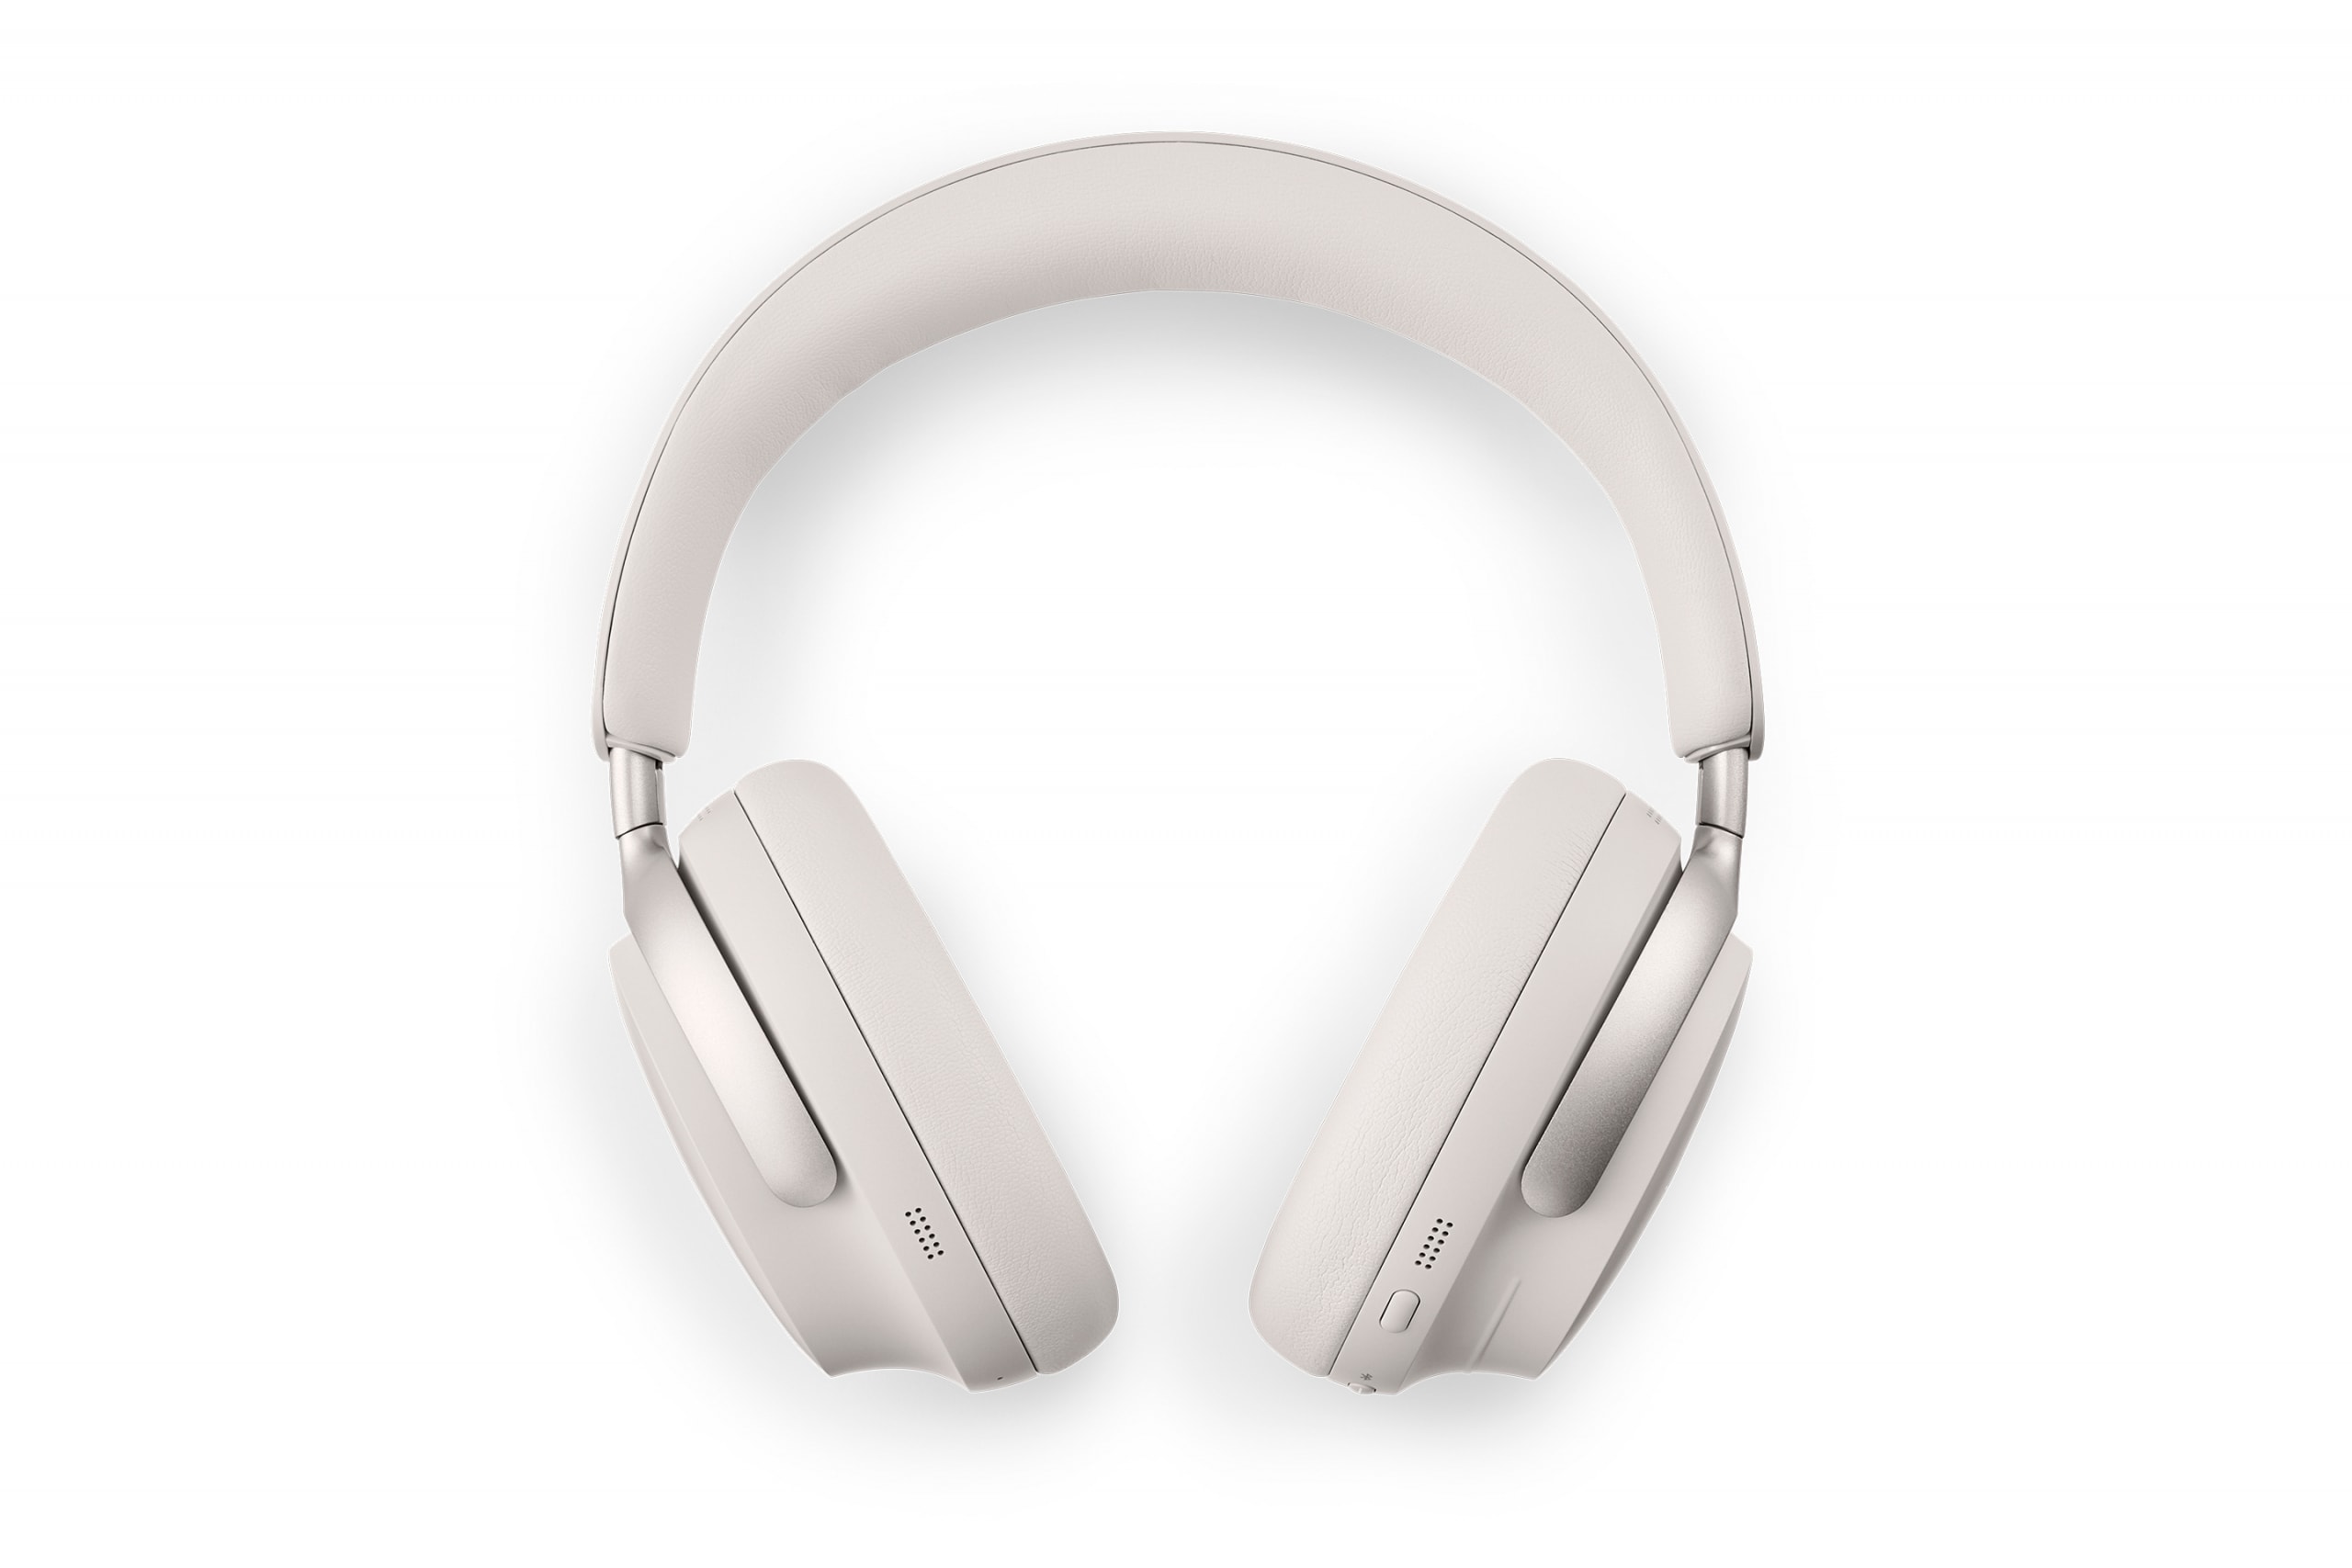 Bose Launches New QuietComfort Ultra Headphones and Earbuds As Part Of Updated Flagship Lineup Premium Wireless Headphones